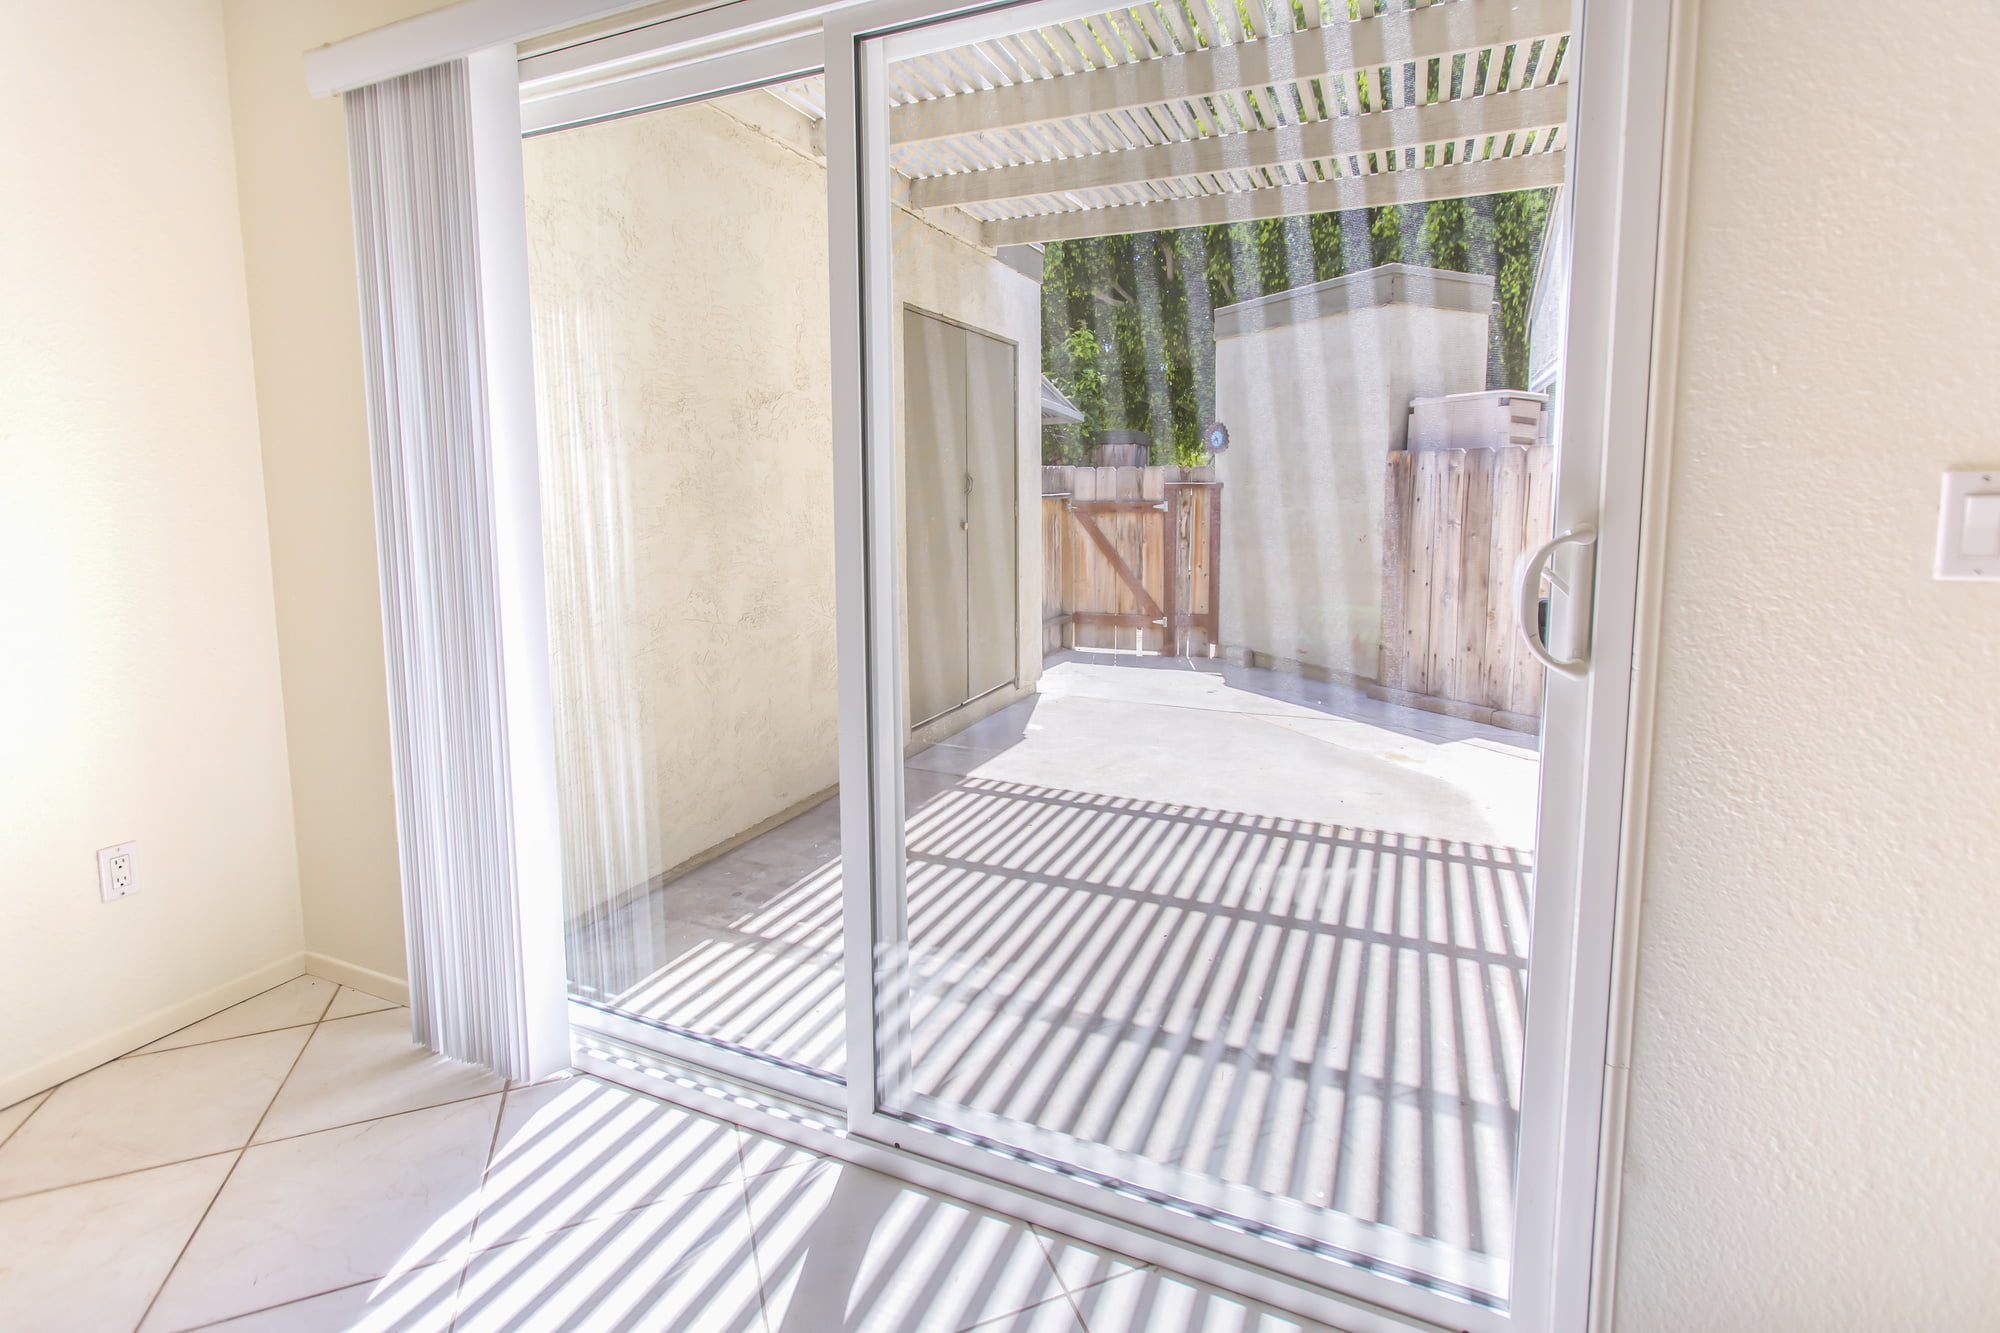 Do you know what factors to consider when replacing your screen door? Avoid installation mishaps with these screen door replacement tips.